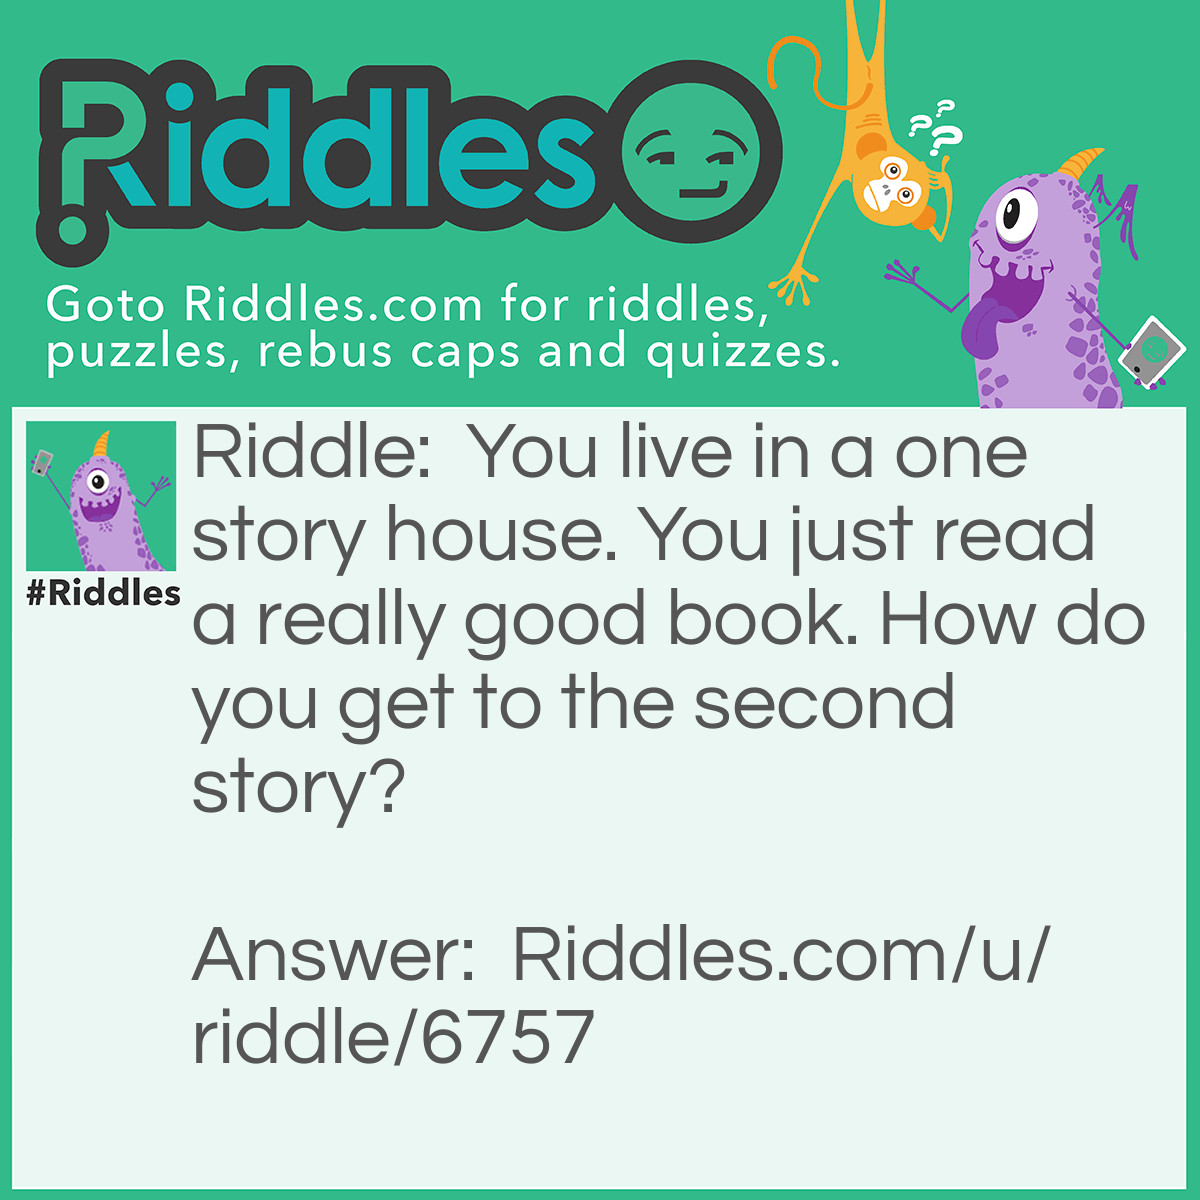 Riddle: You live in a one story house. You just read a really good book. How do you get to the second story? Answer: Go to the library.